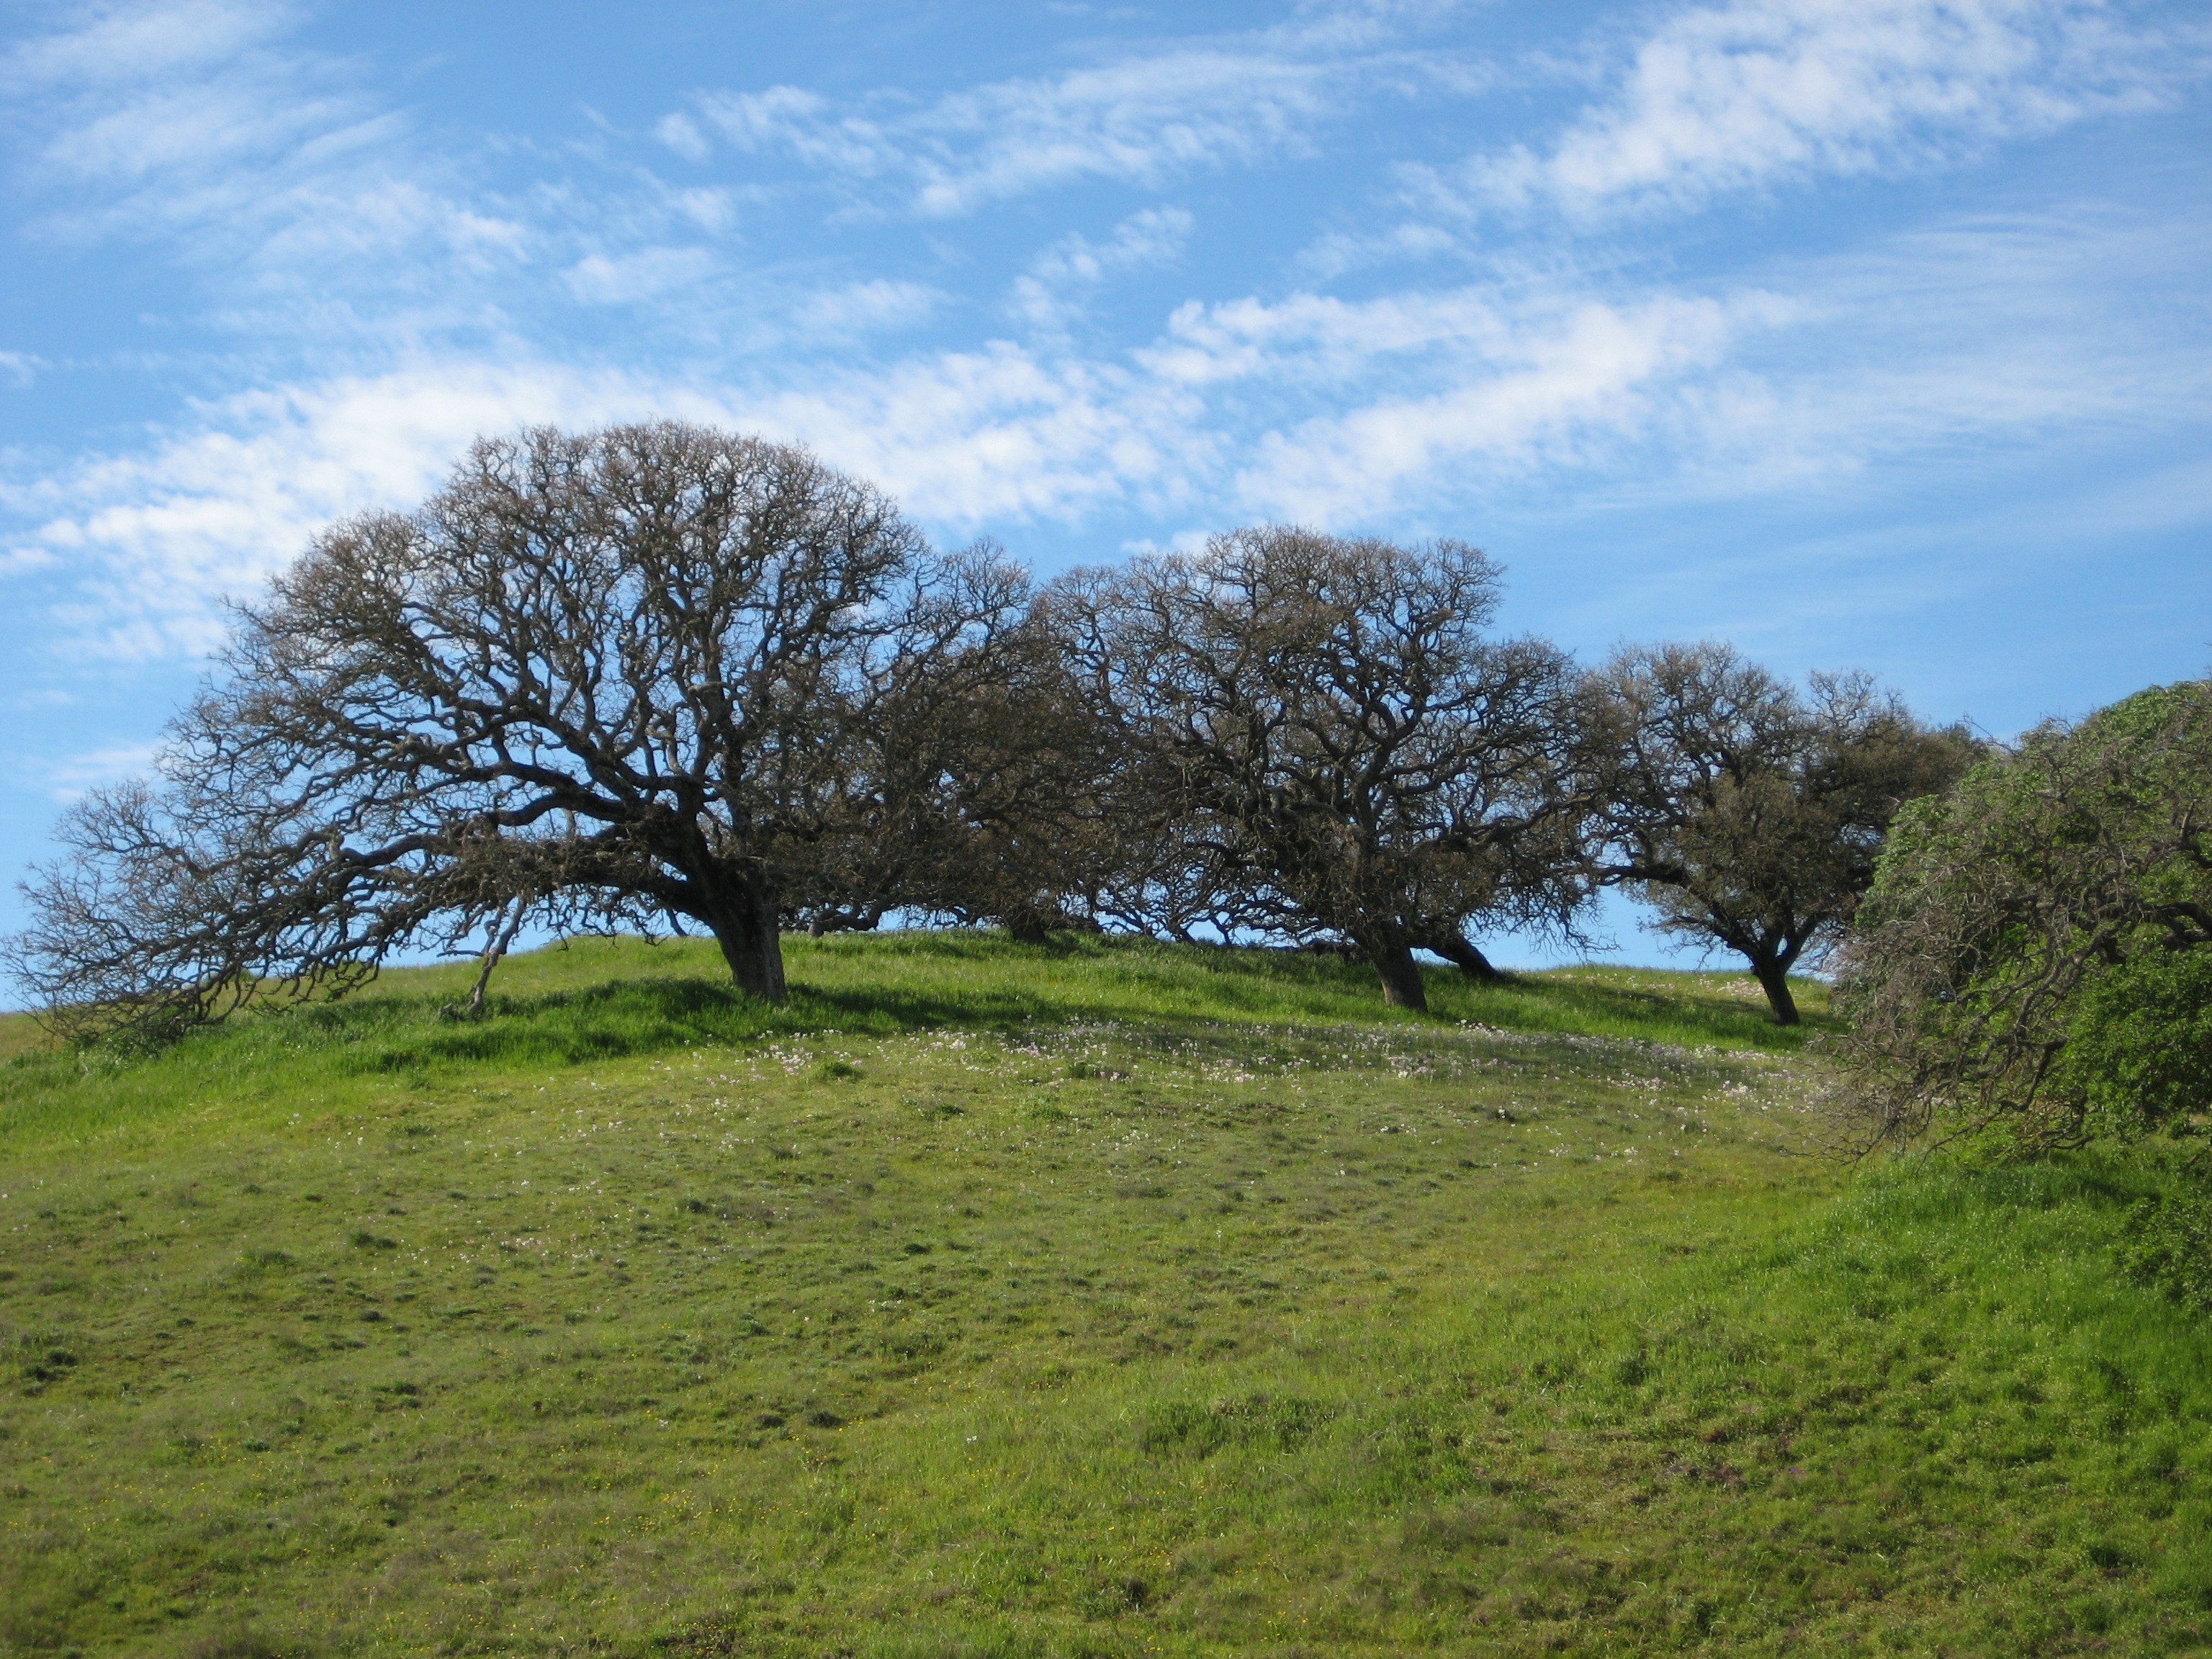 Trees on a hill in Pacheco State Park, California.